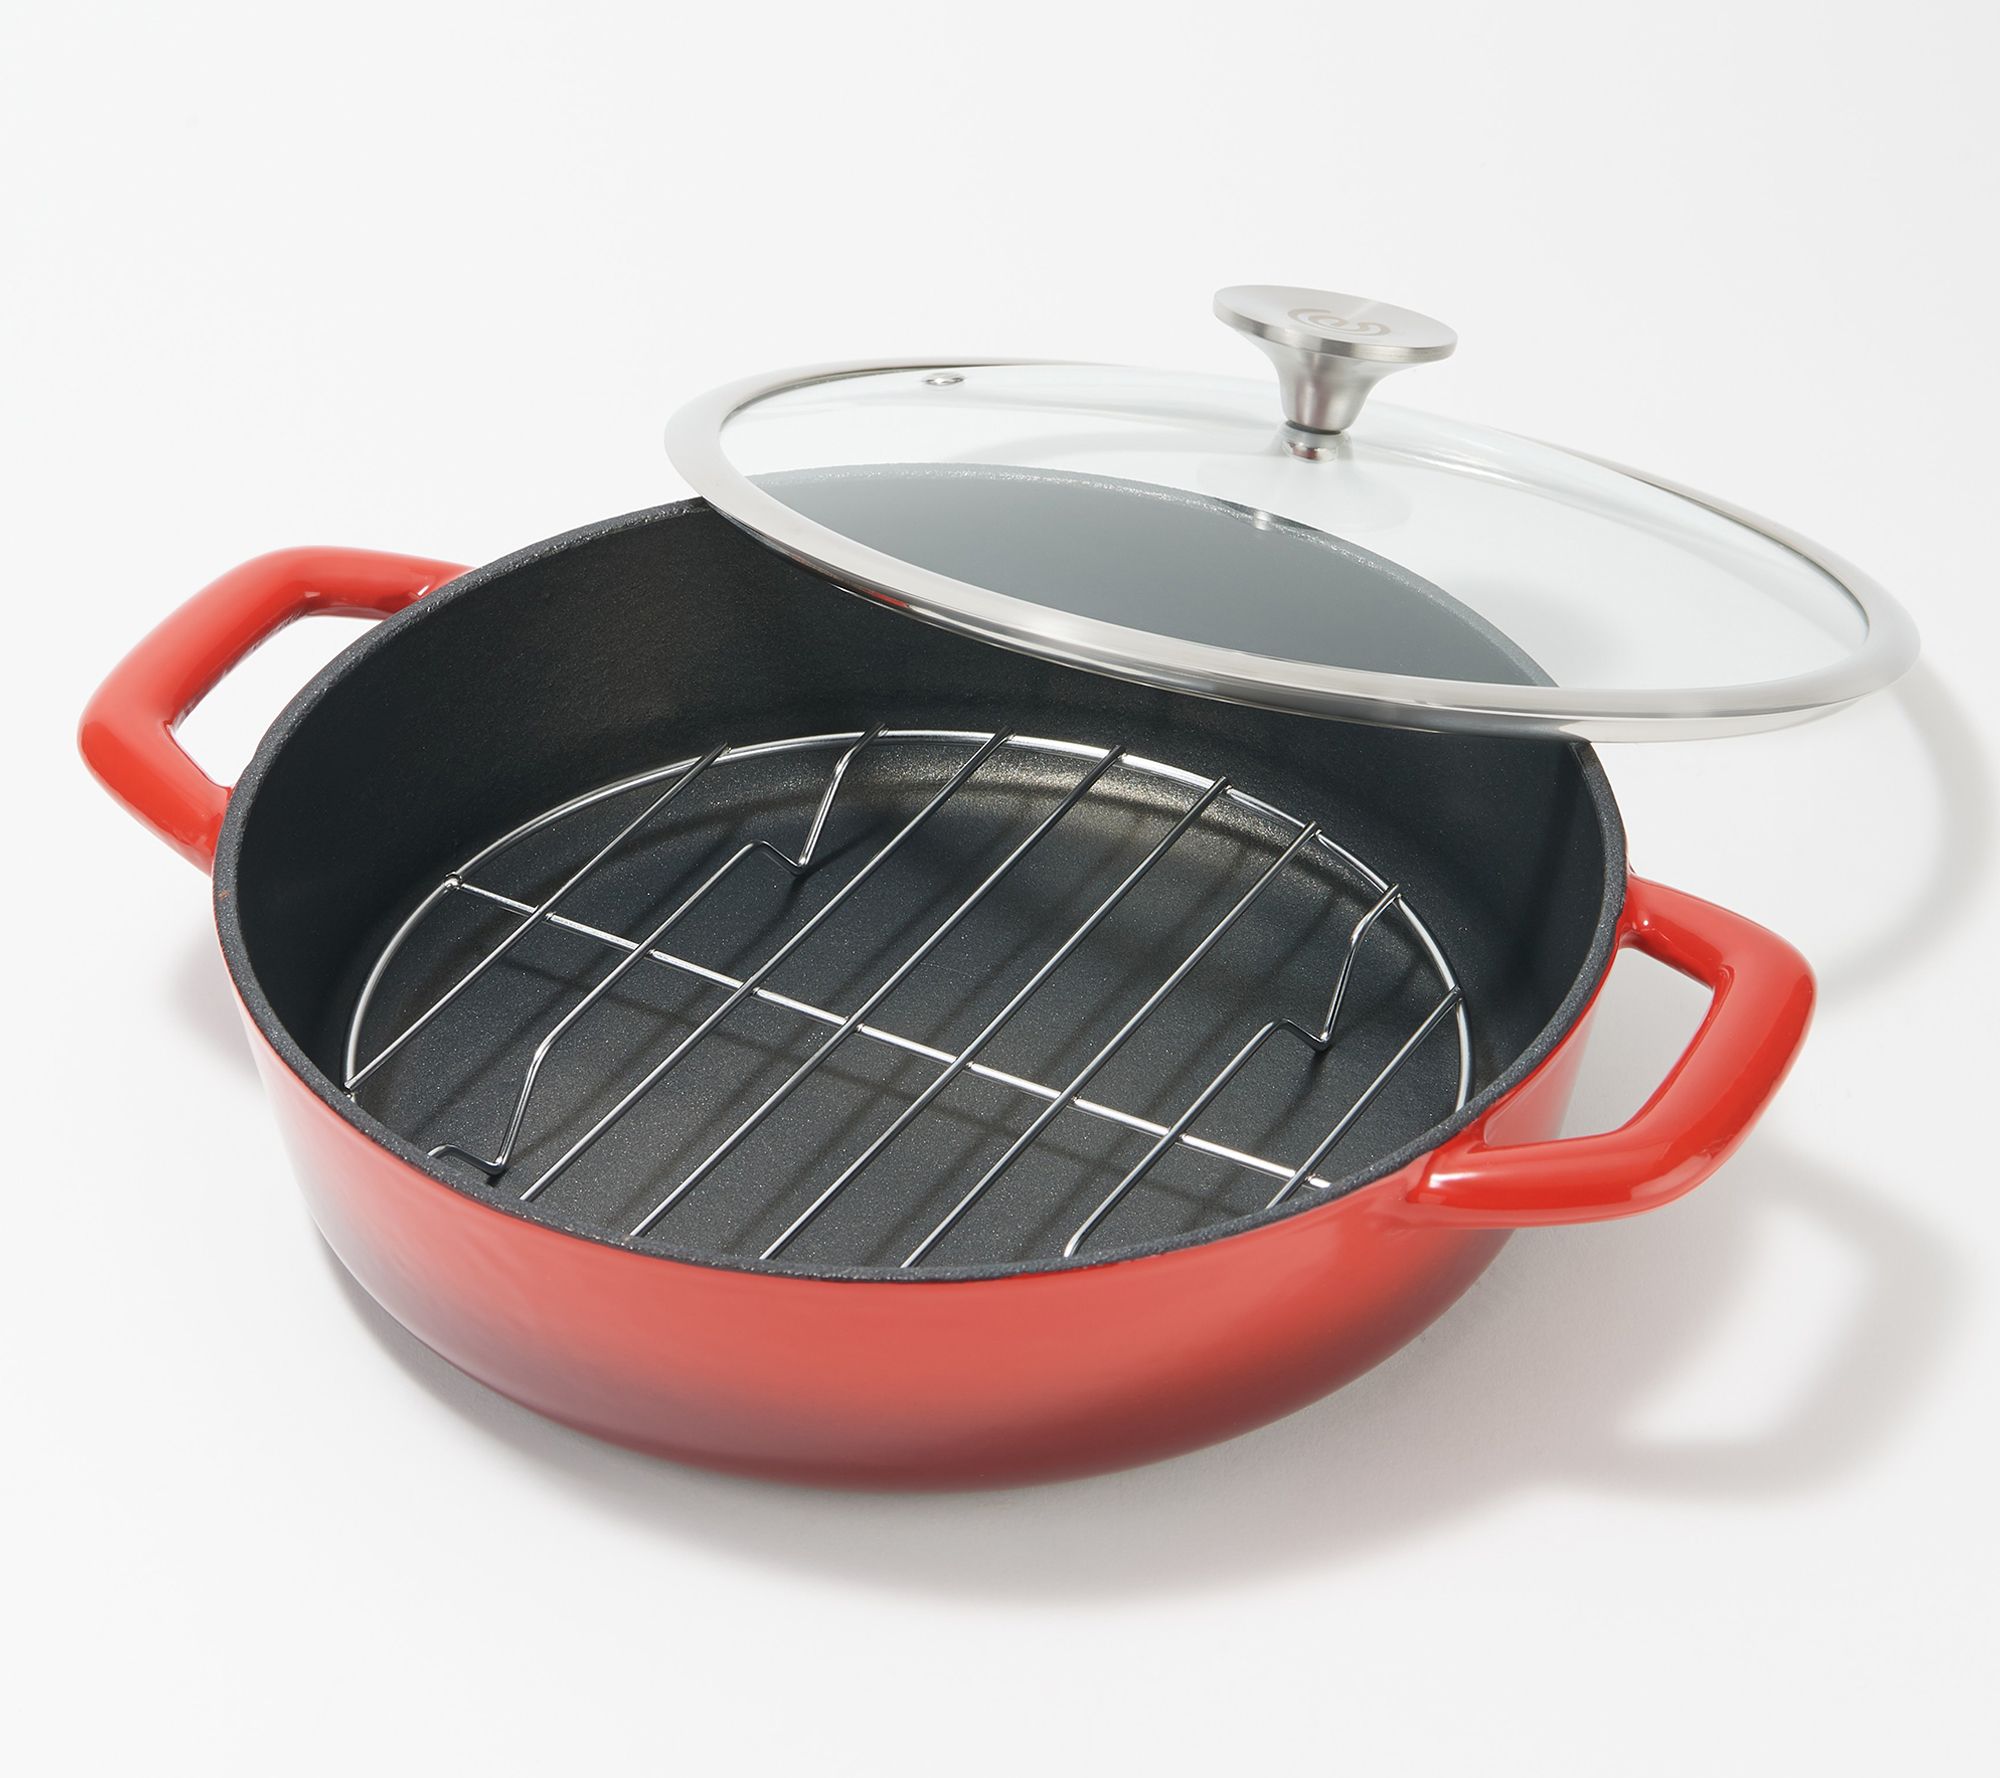 Order a Braiser Pan with Round Fry Basket for Batch Cooking  Buy the ES5 6  QT Covered Braiser Set with Fry Baset at SCANPAN USA